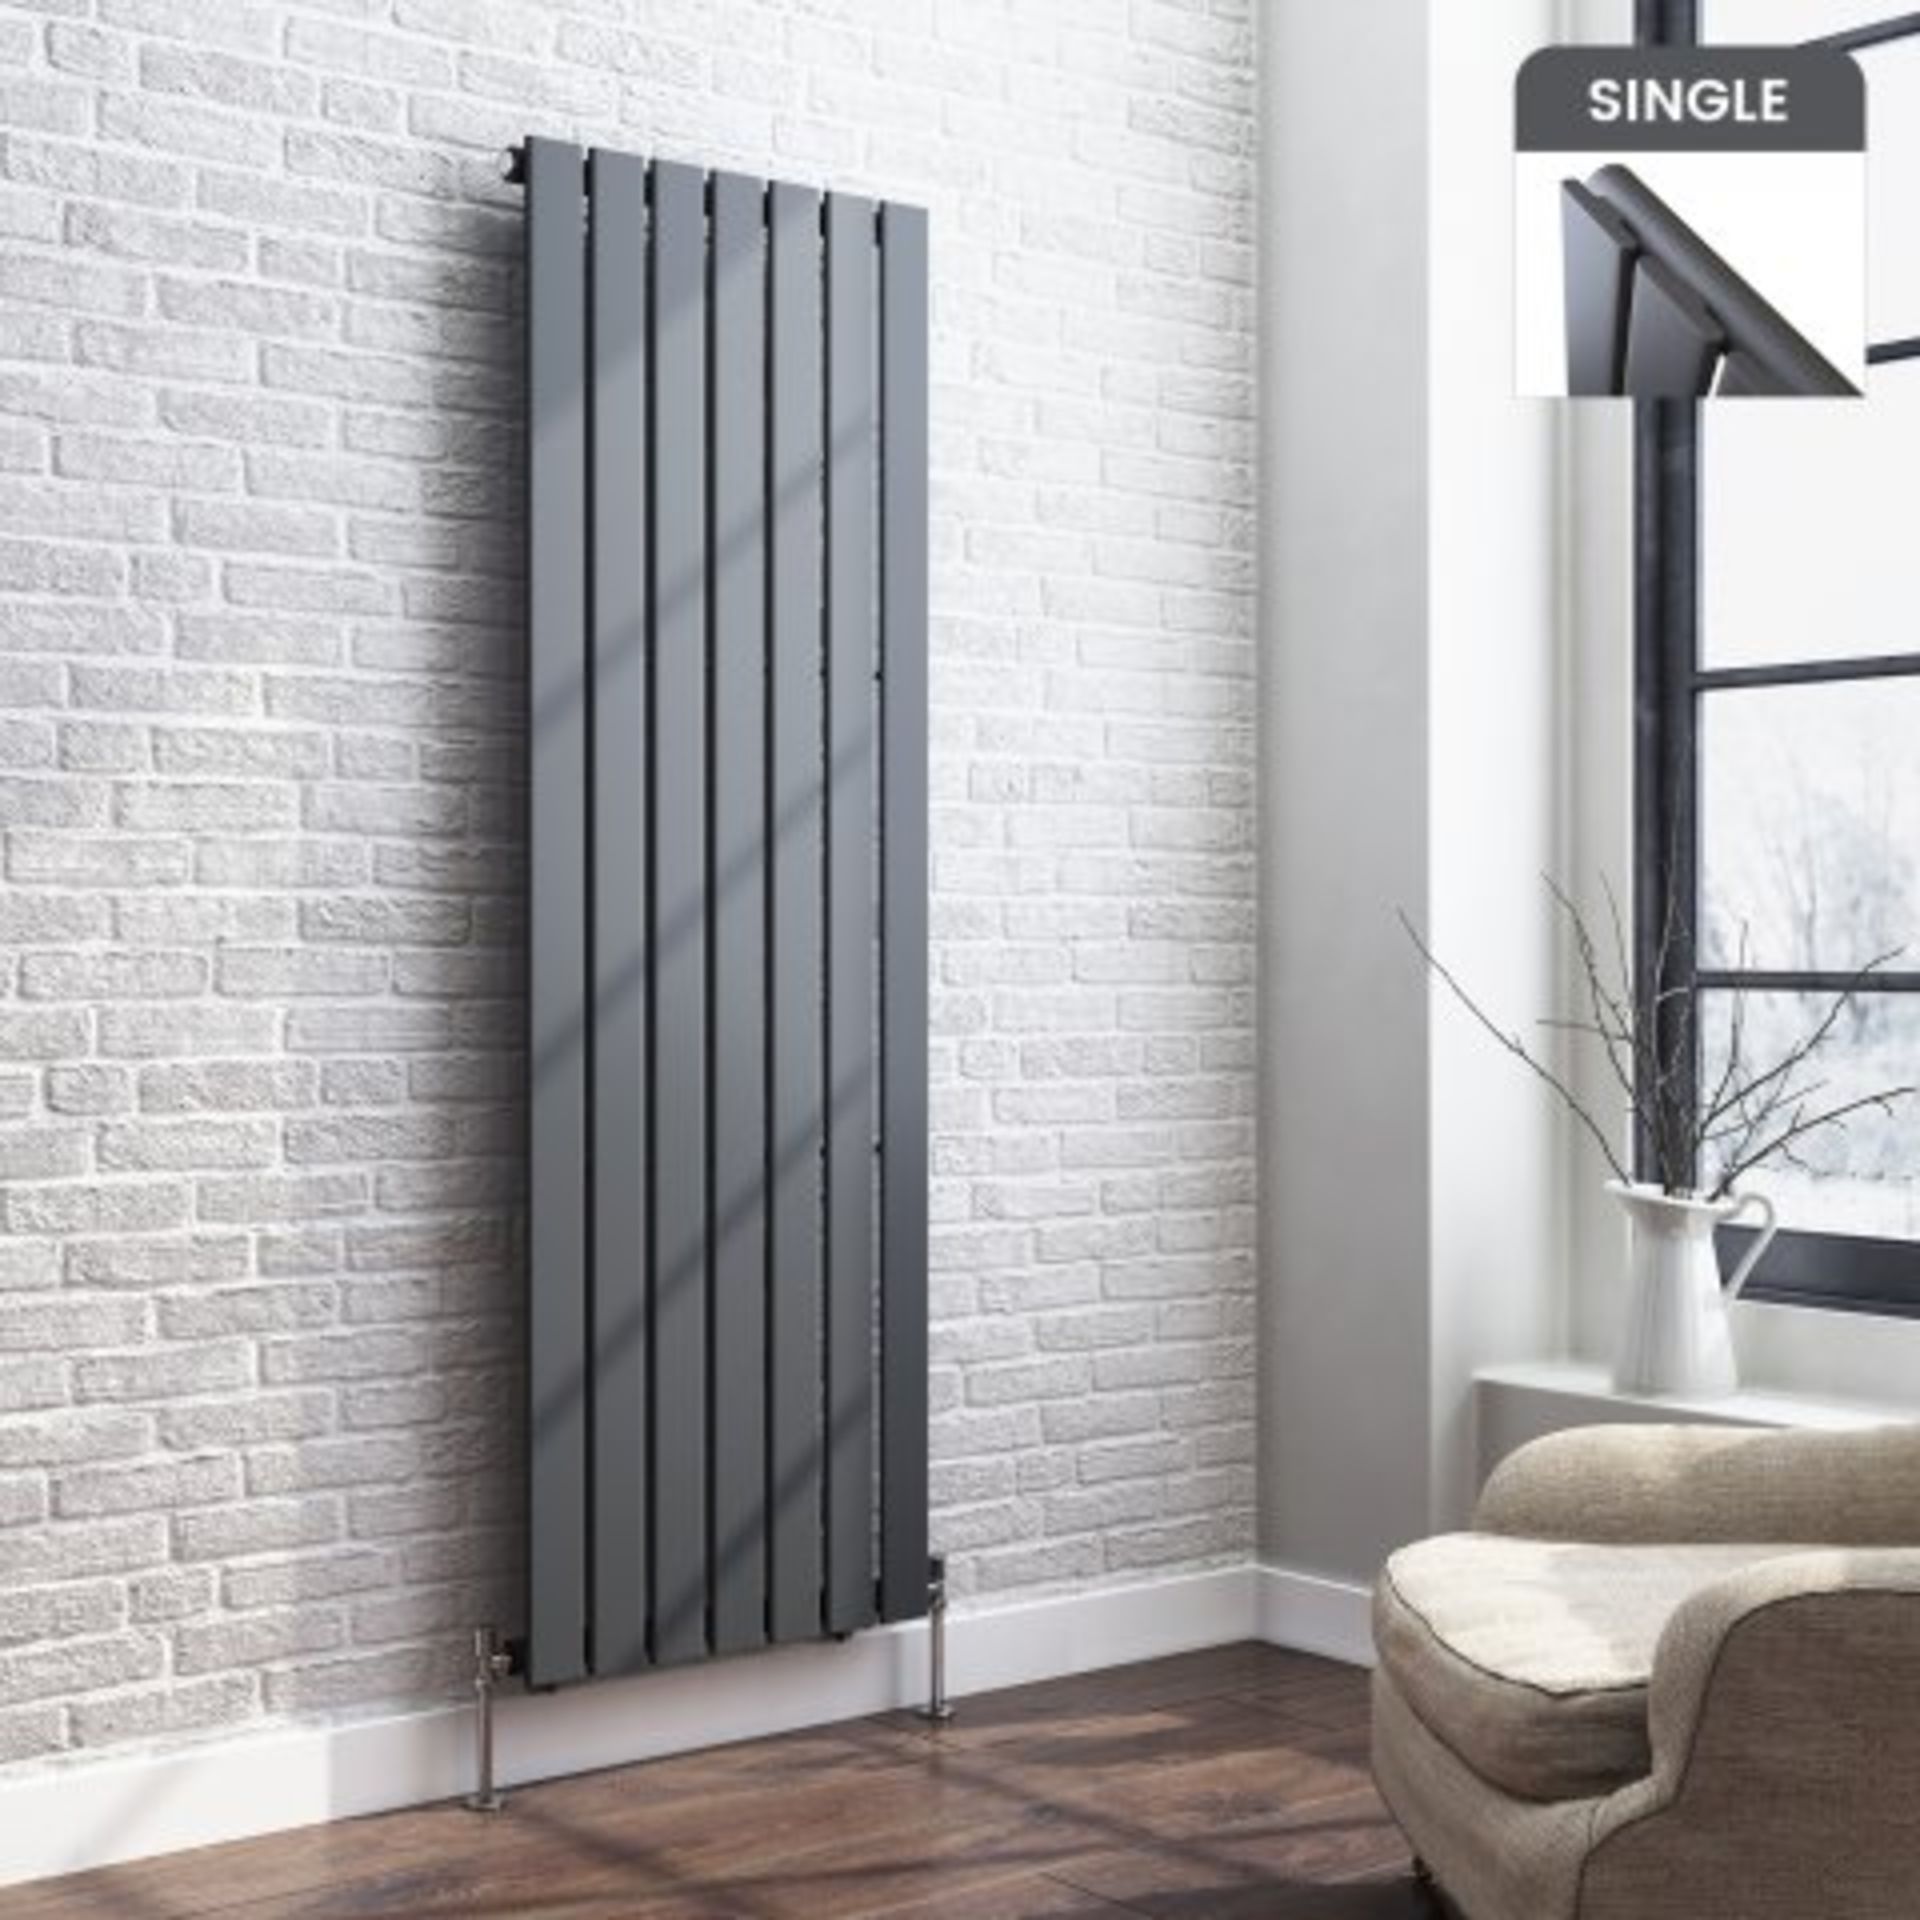 (REF156) 1600x532mm Anthracite Single Flat Panel Vertical Radiator - Thera Premium. RRP £299.99. Our